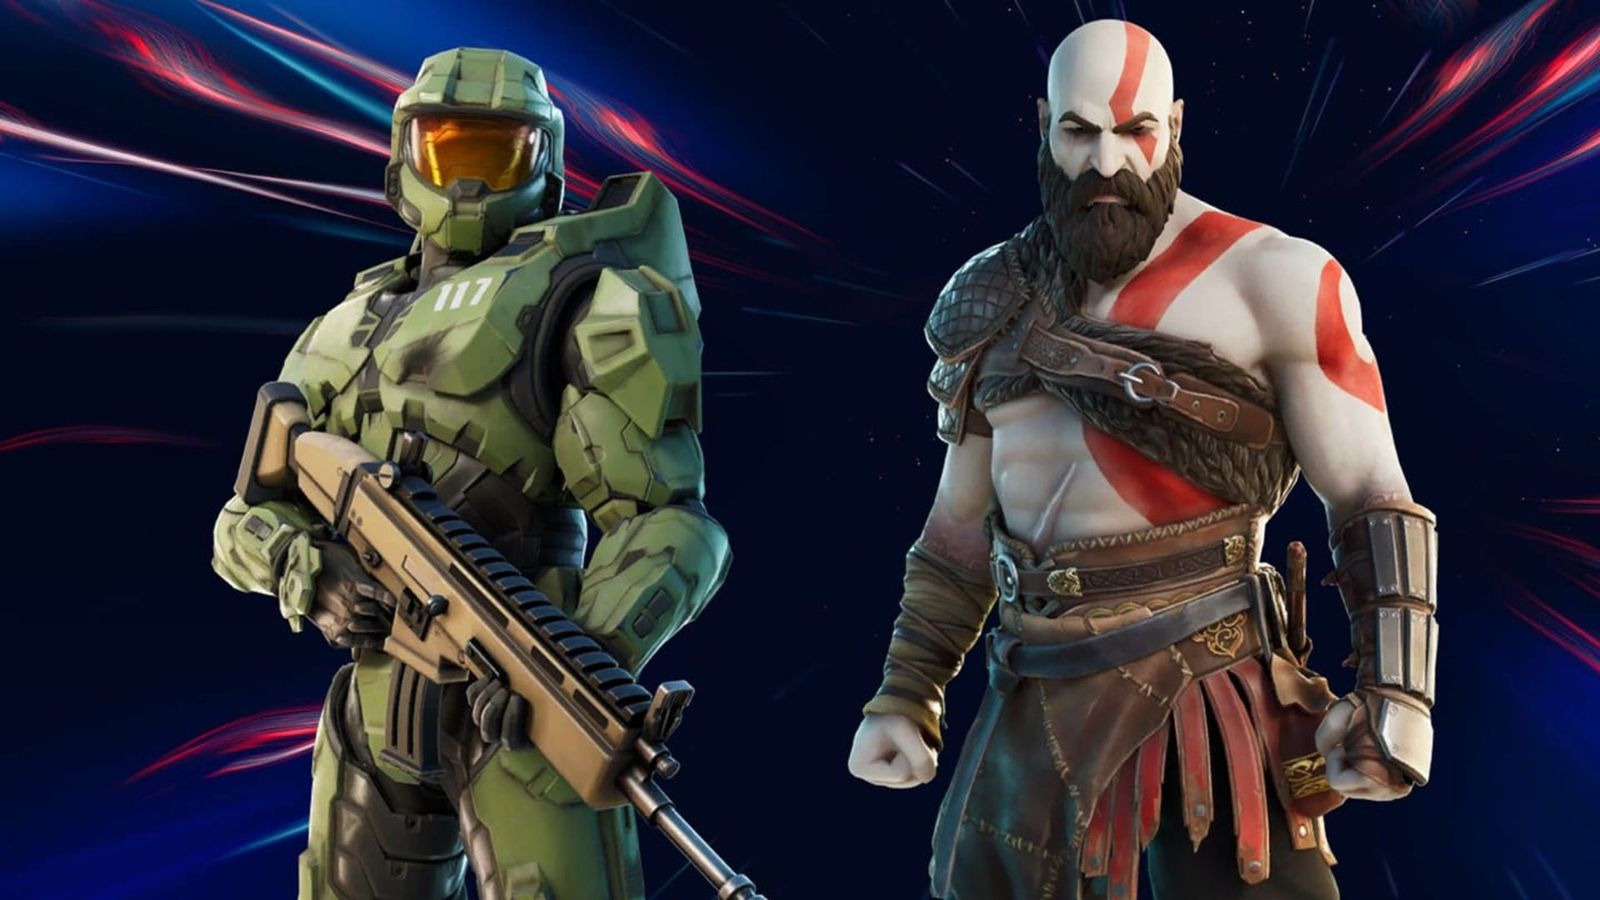 Master Chief and Kratos' skins side by side in Fortnite